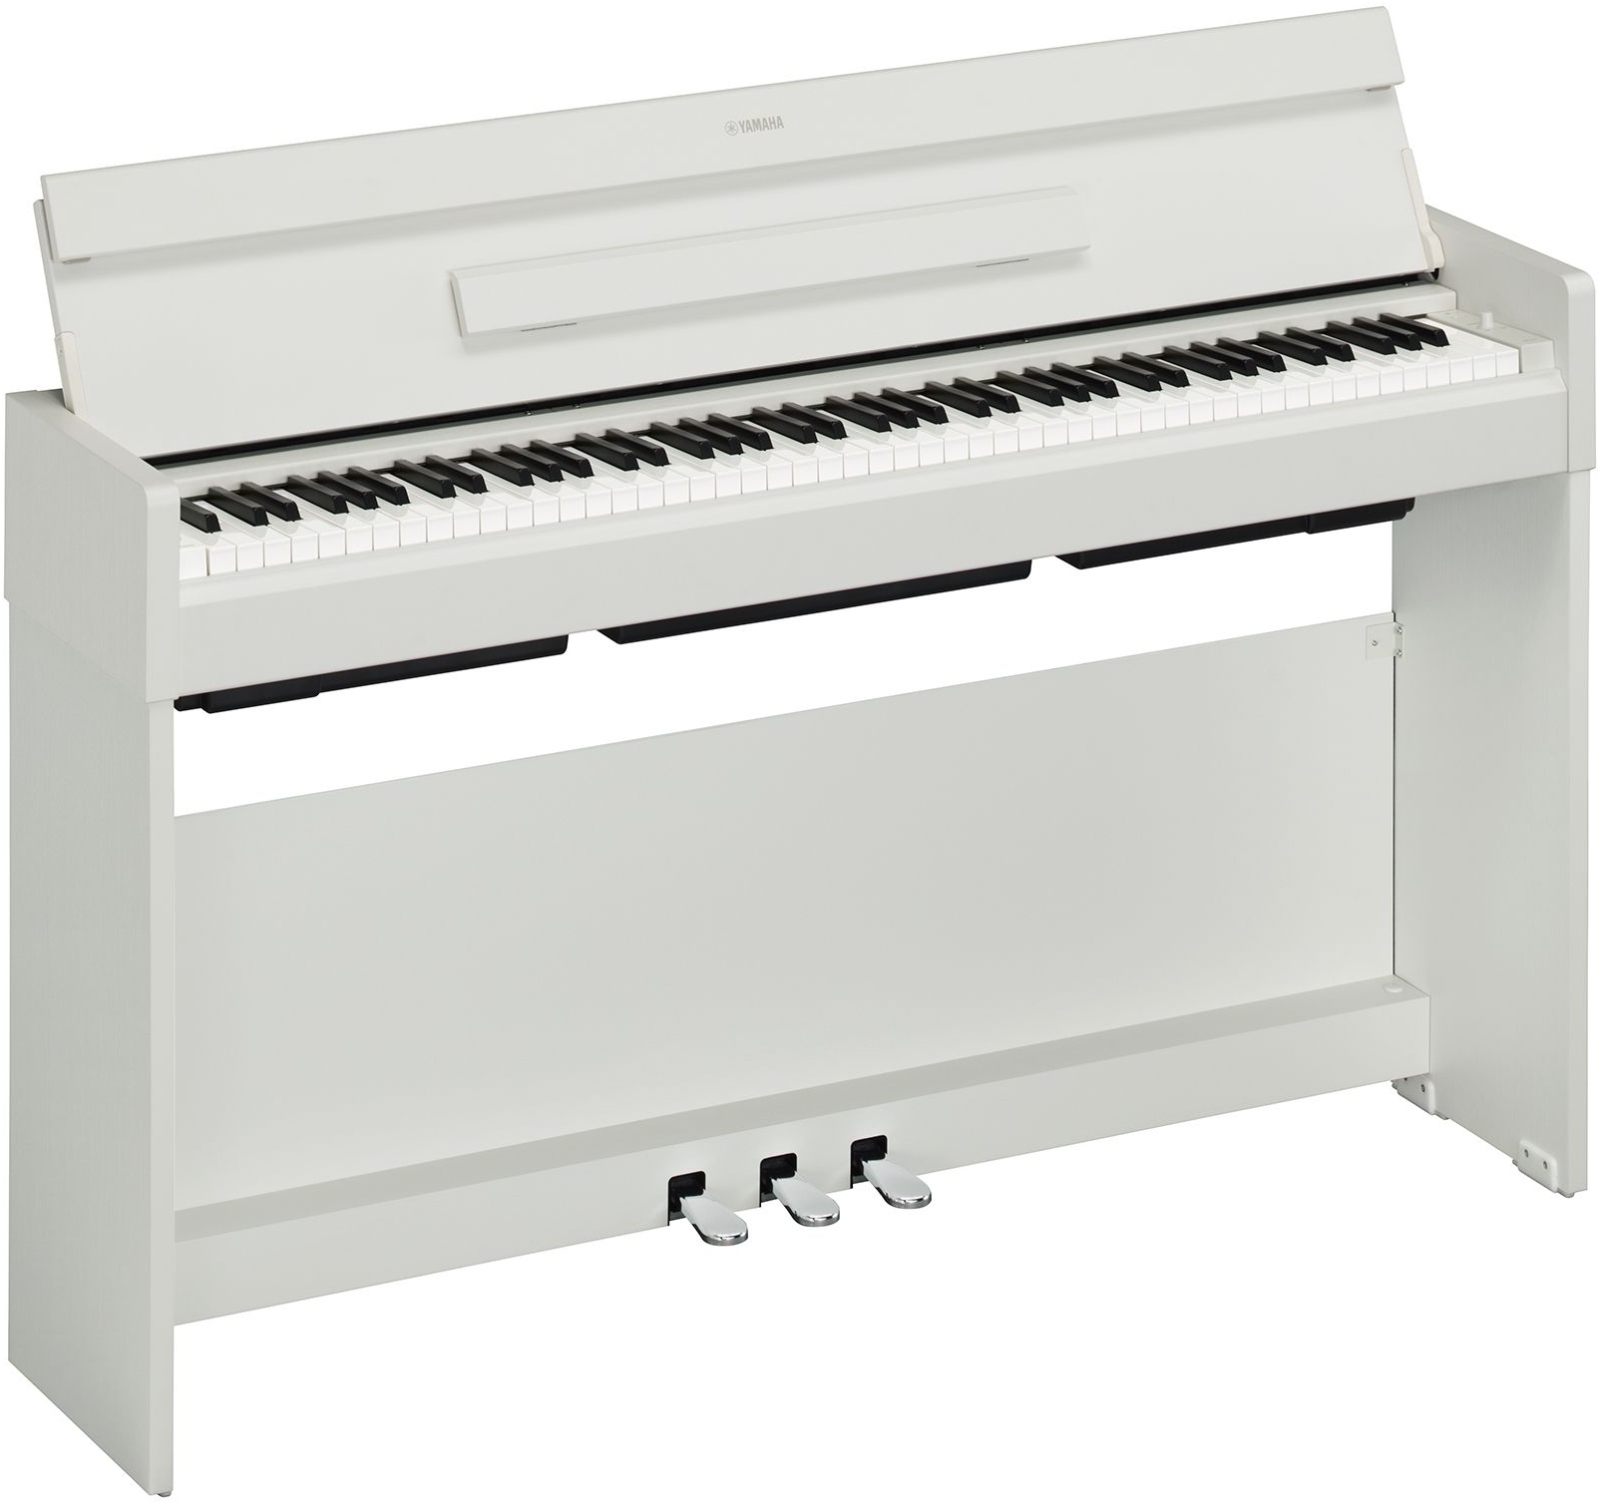 Yamaha Ydp-s35 Wh - Digital piano with stand - Variation 1